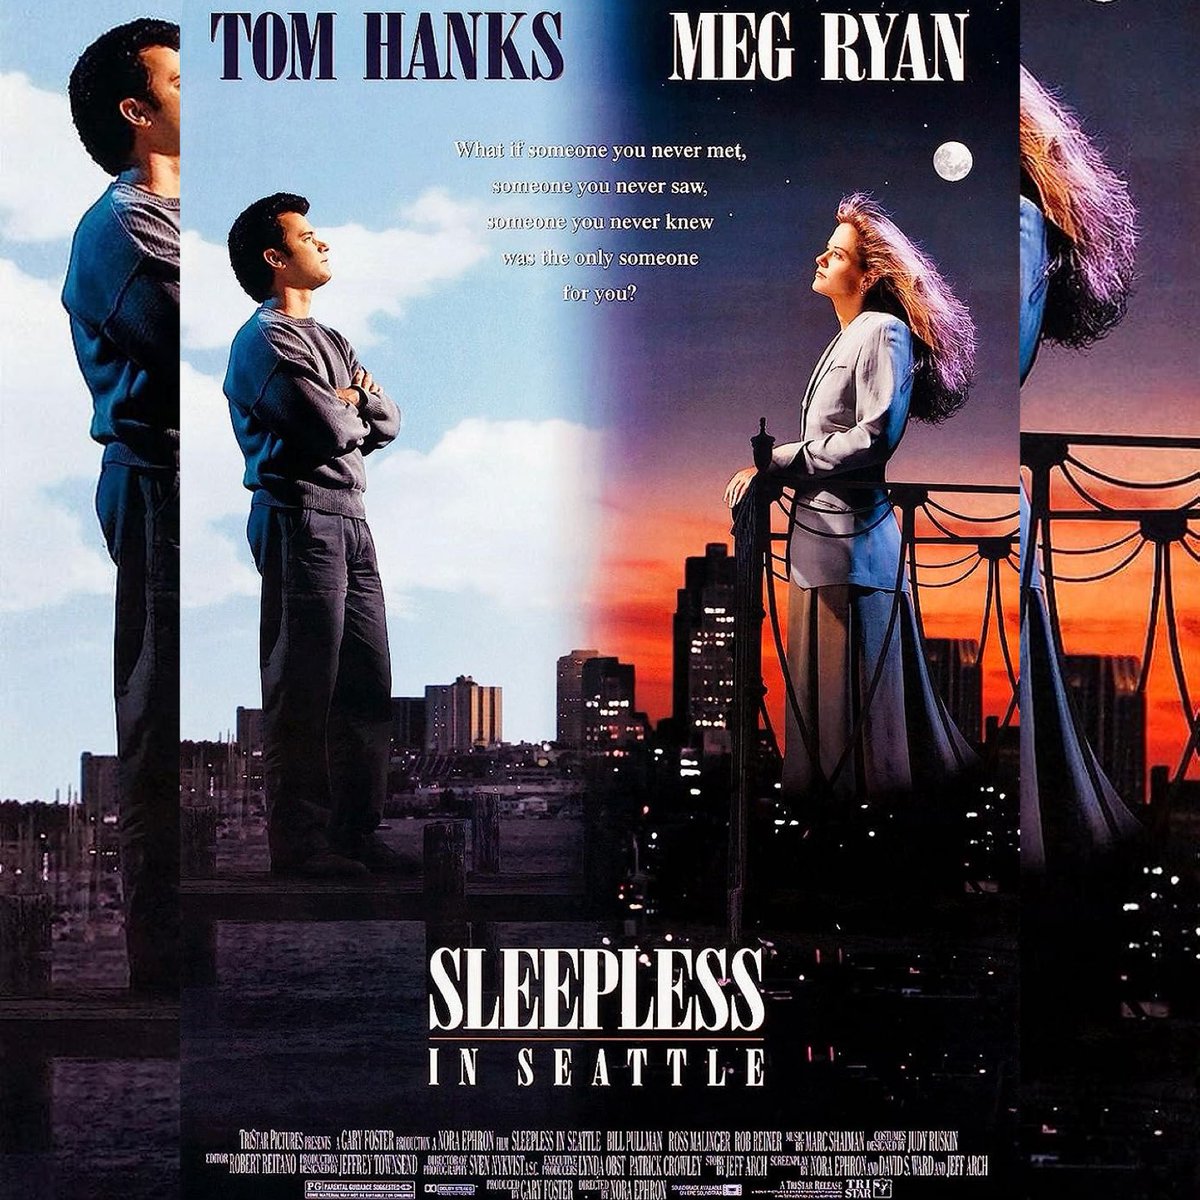 “Name a rom-com you defend with your whole heart”: Sleepless in Seattle. #SleeplessInSeattle 🎬.